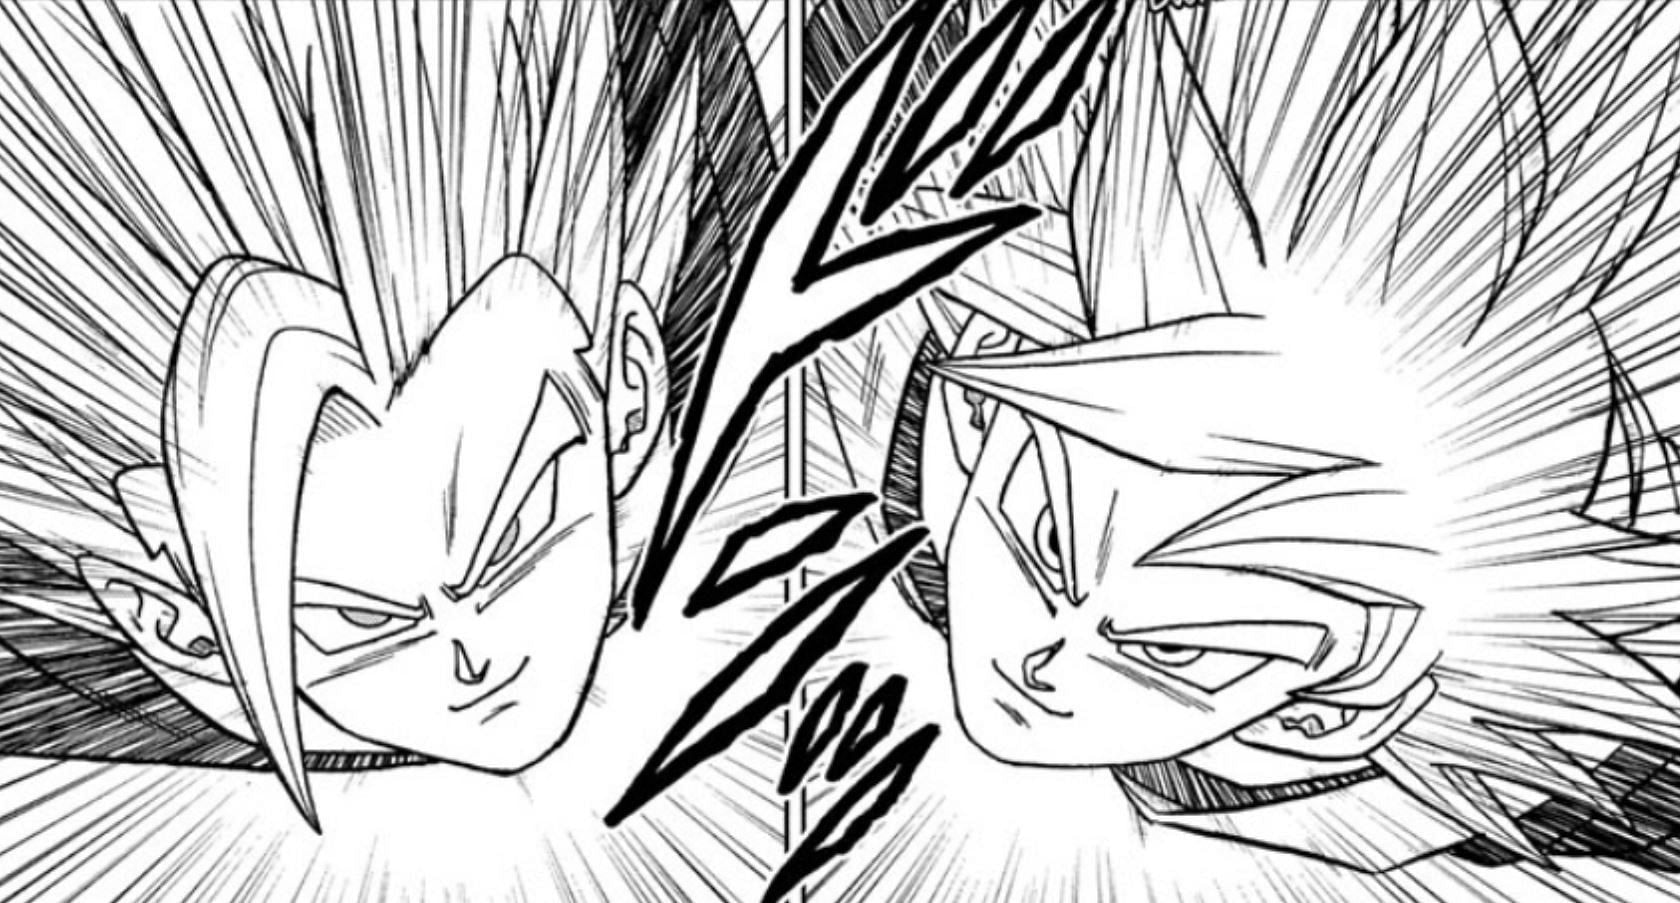 Dragon Ball Super chapter 103 first preview shows Goku vs Gohan heating up